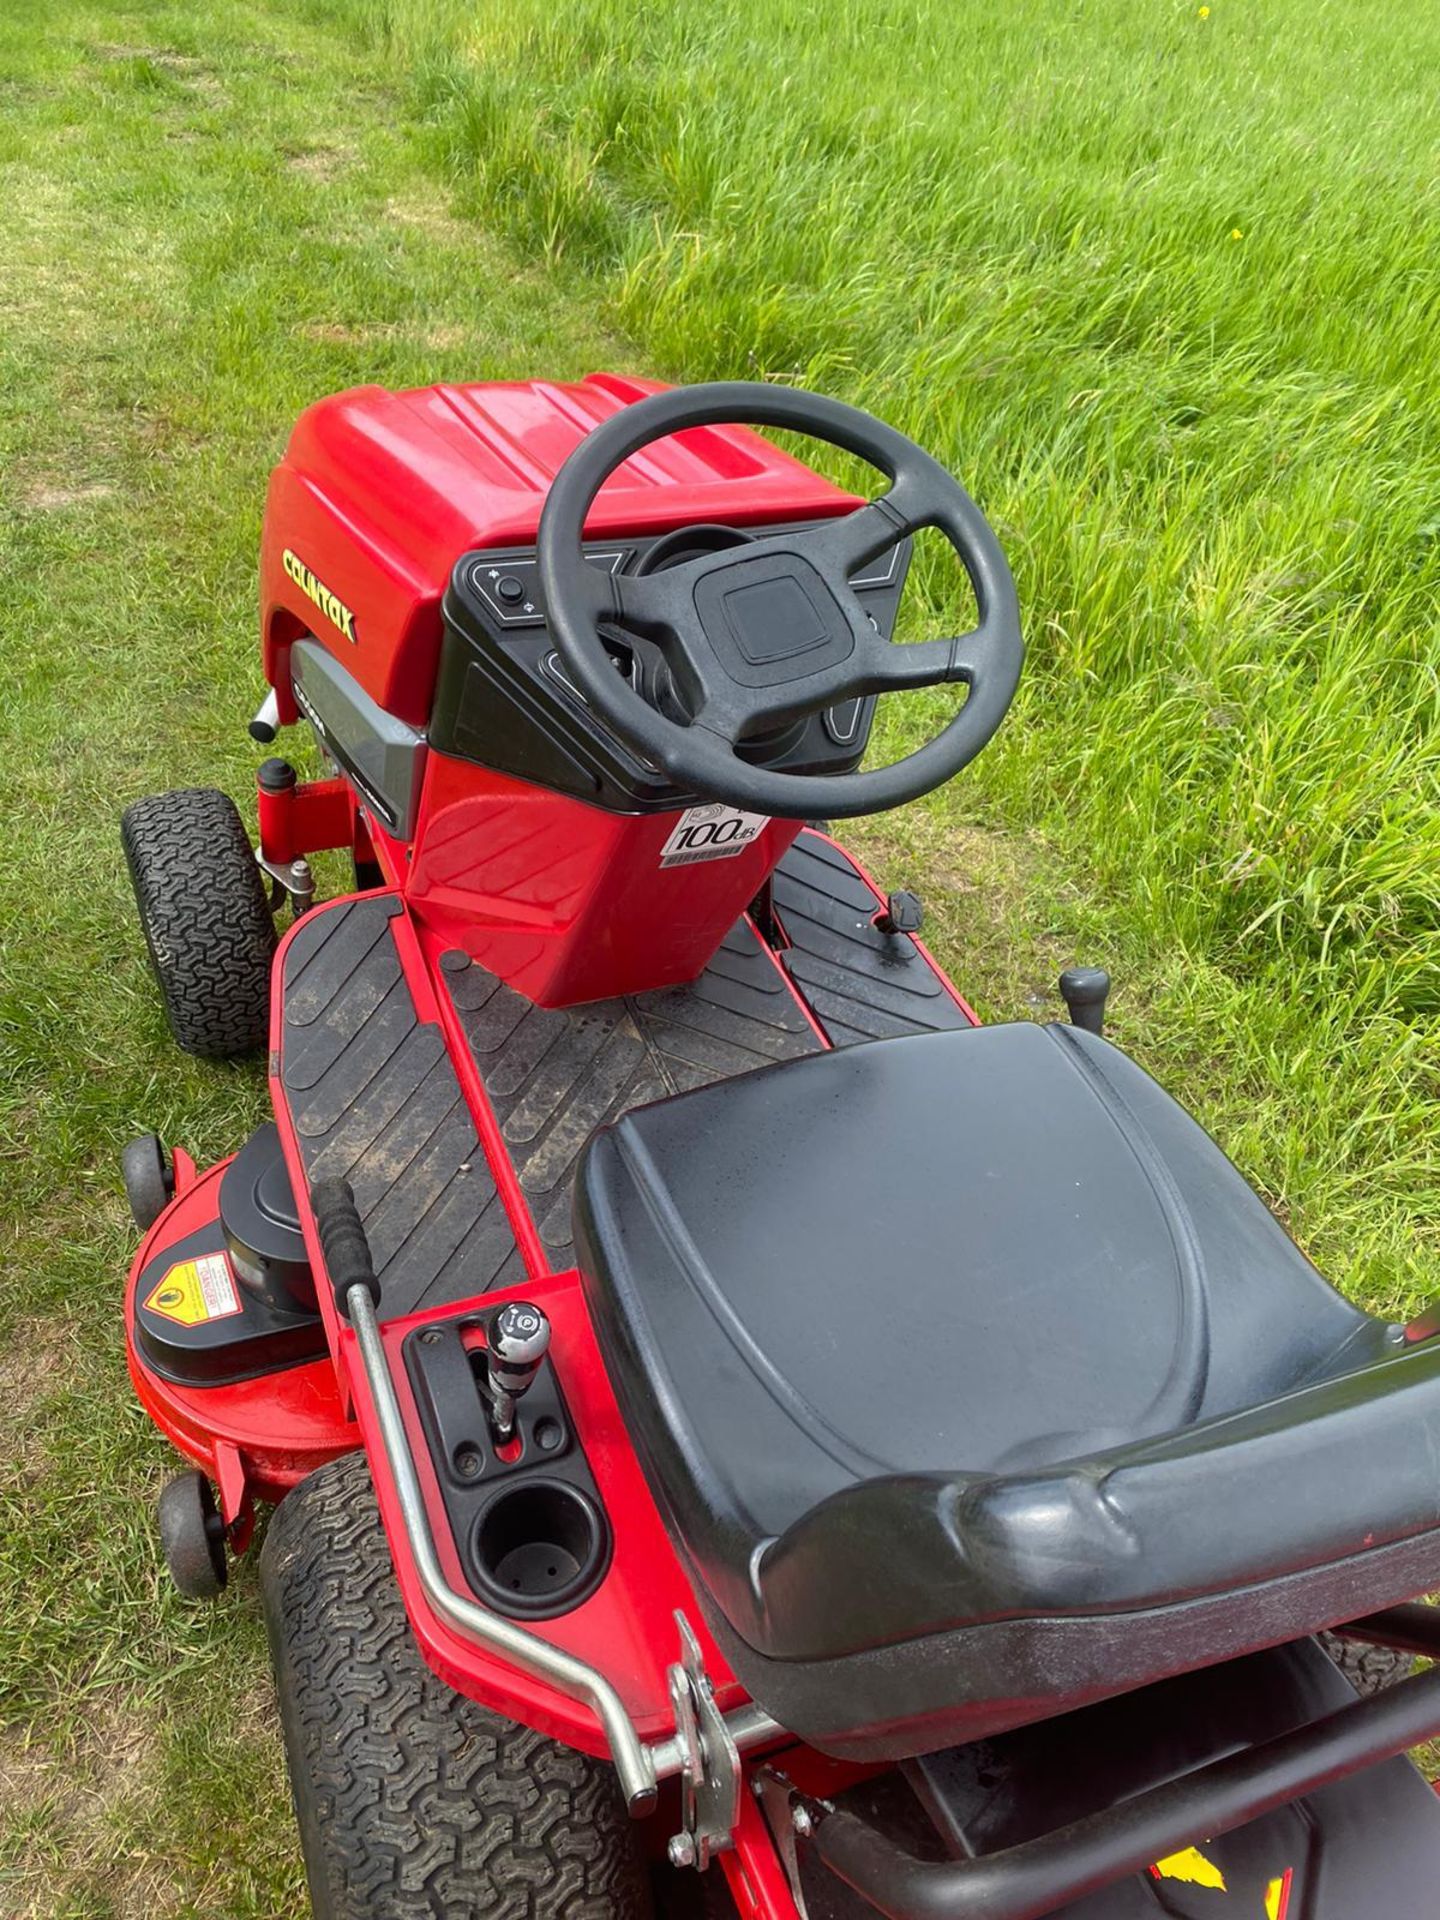 COUNTAX C600H ride on lawn mower, 42 inch cutting deck *PLUS VAT* - Image 8 of 8